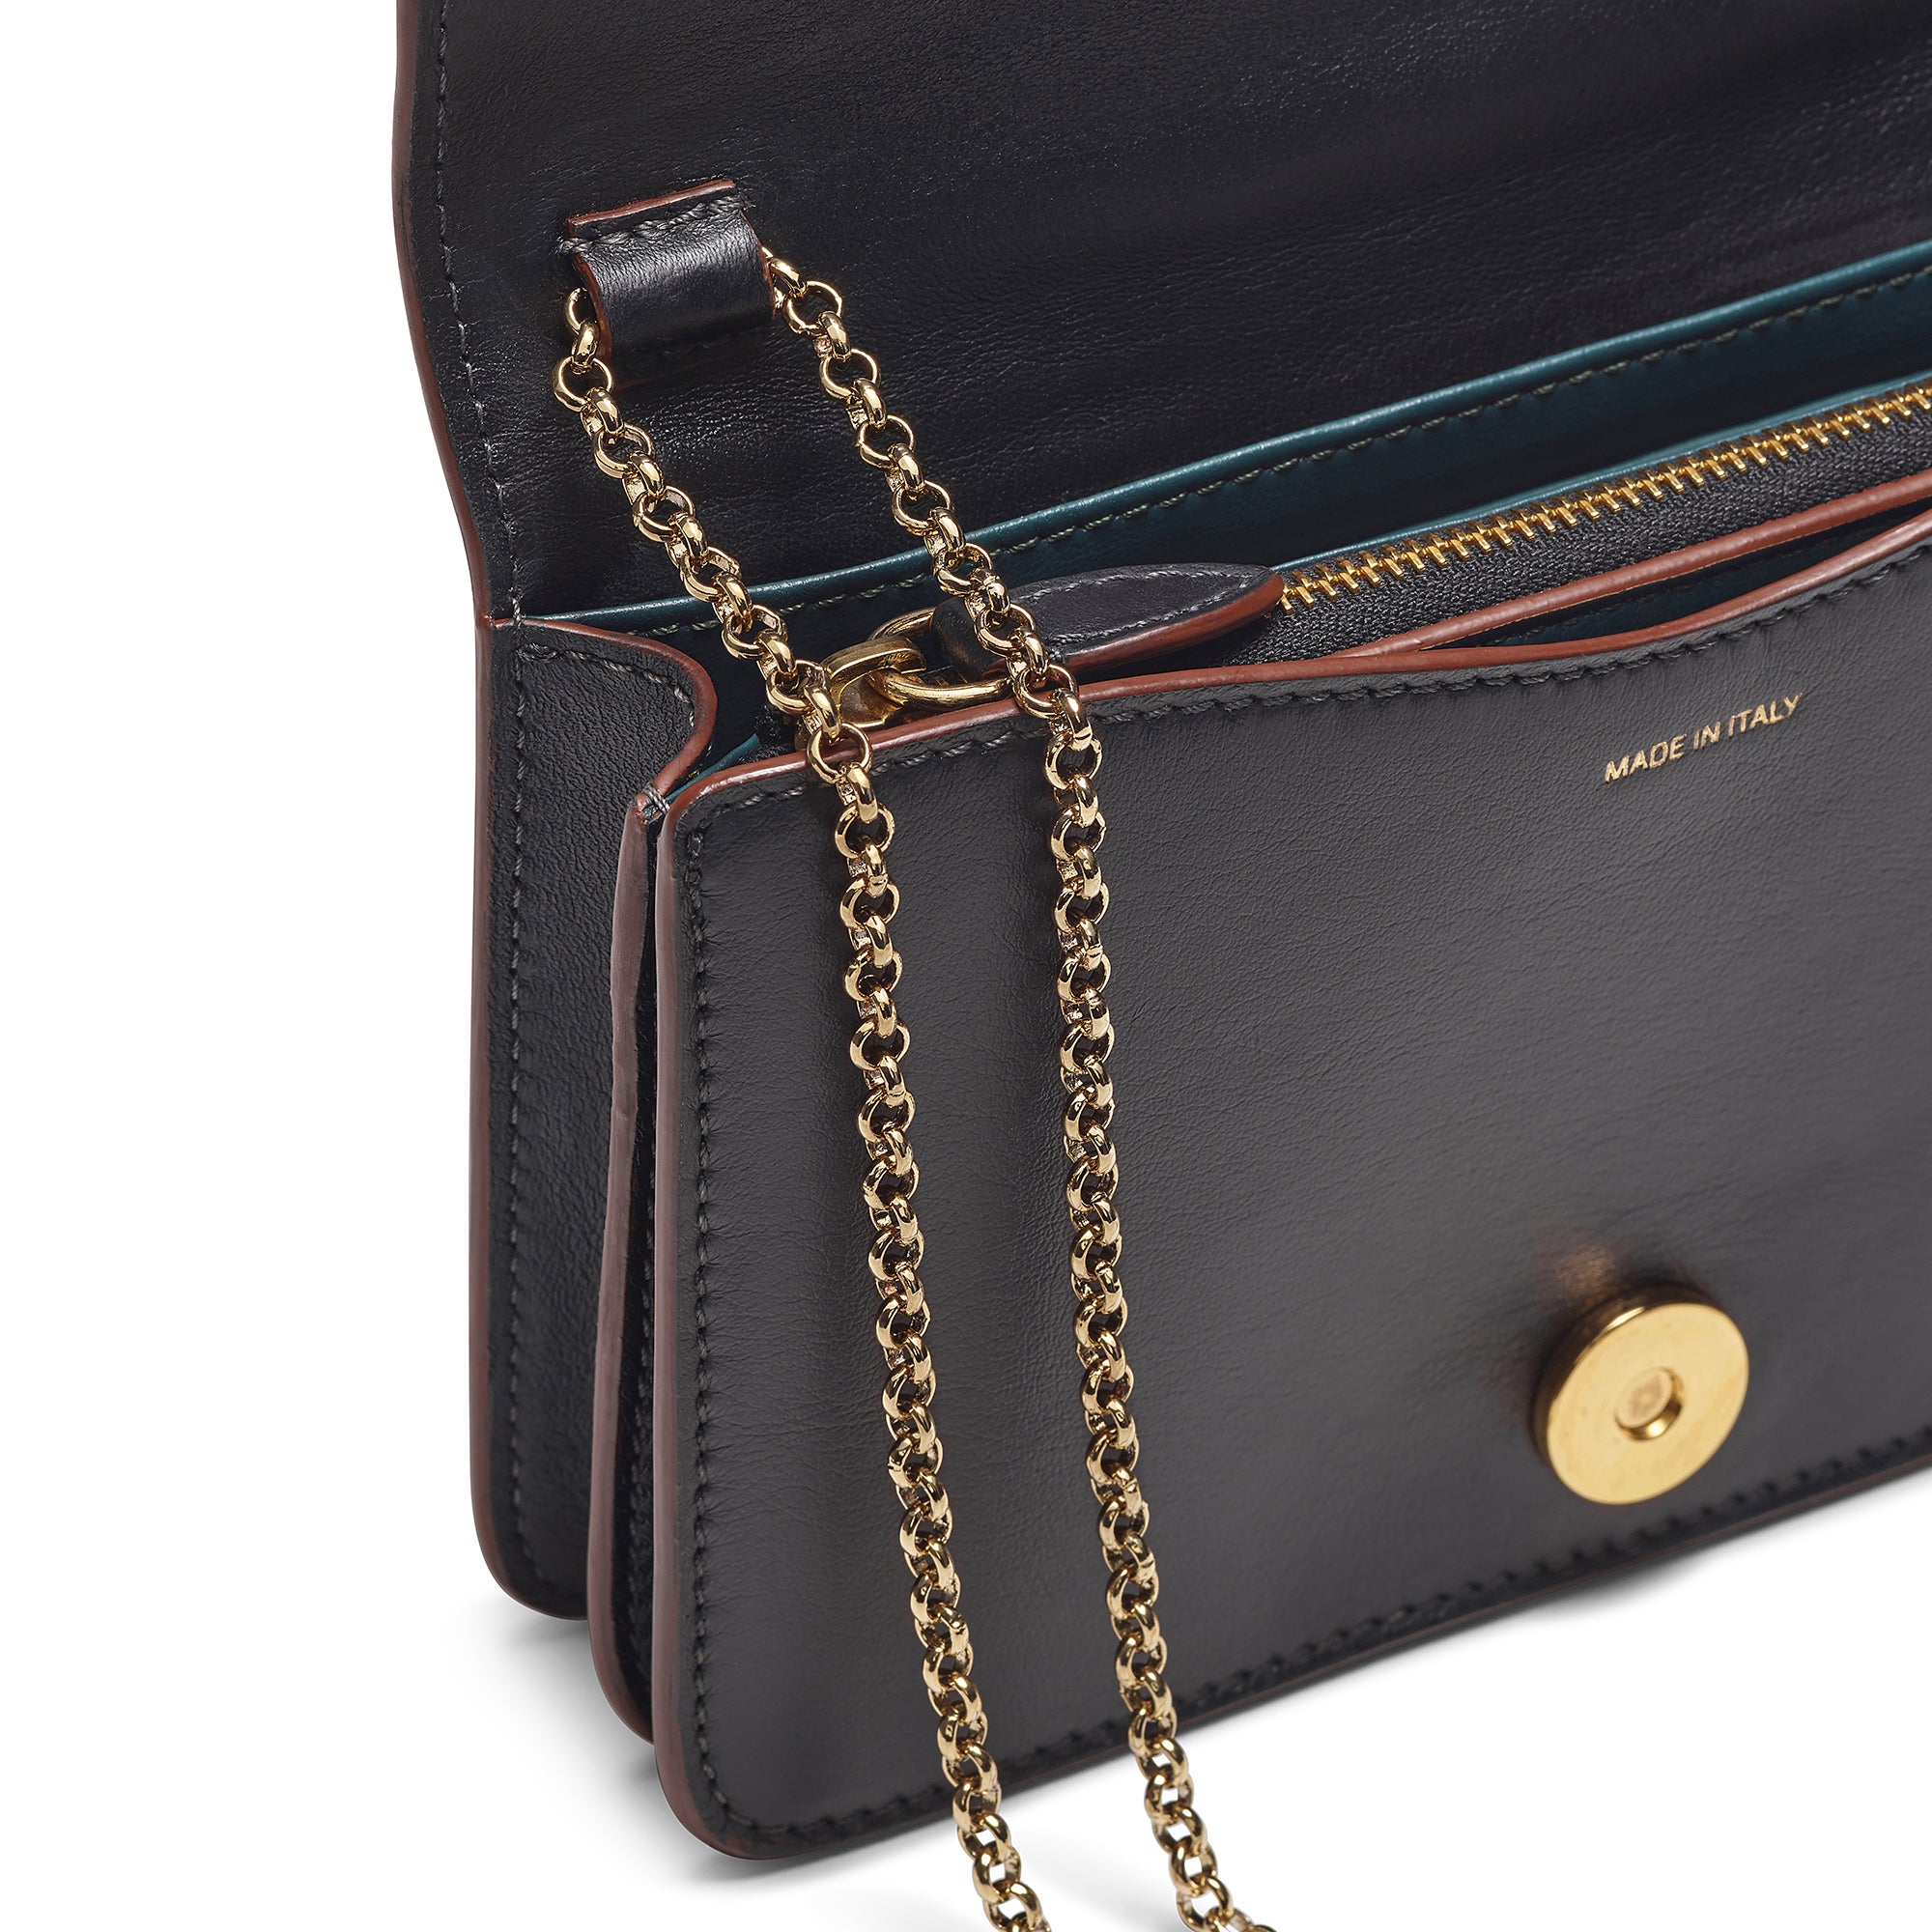 CREAGH - Minibag with Gold Chain, Black Smooth Leather